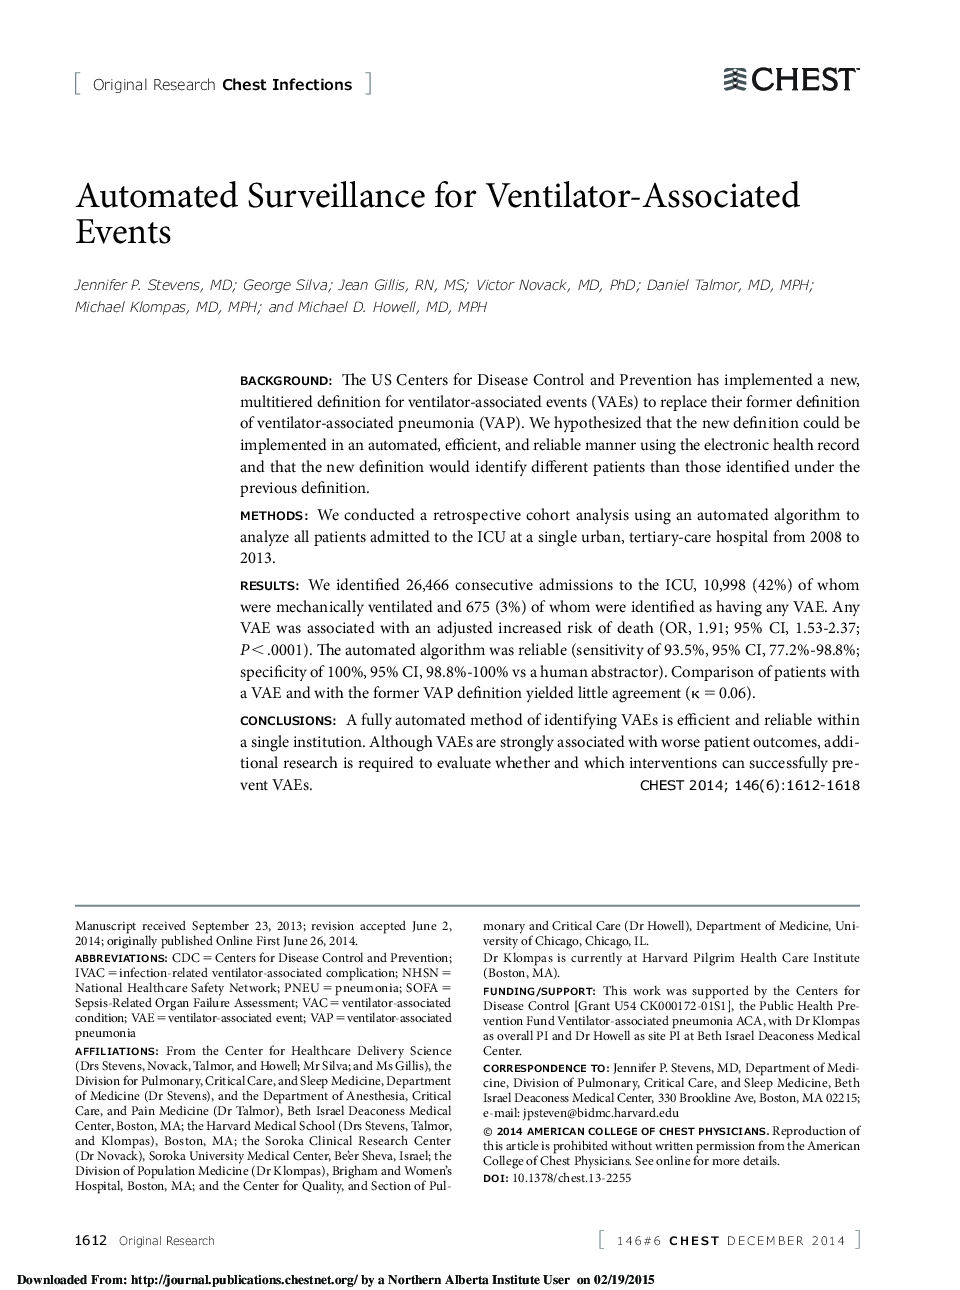 Automated Surveillance for Ventilator-Associated Events